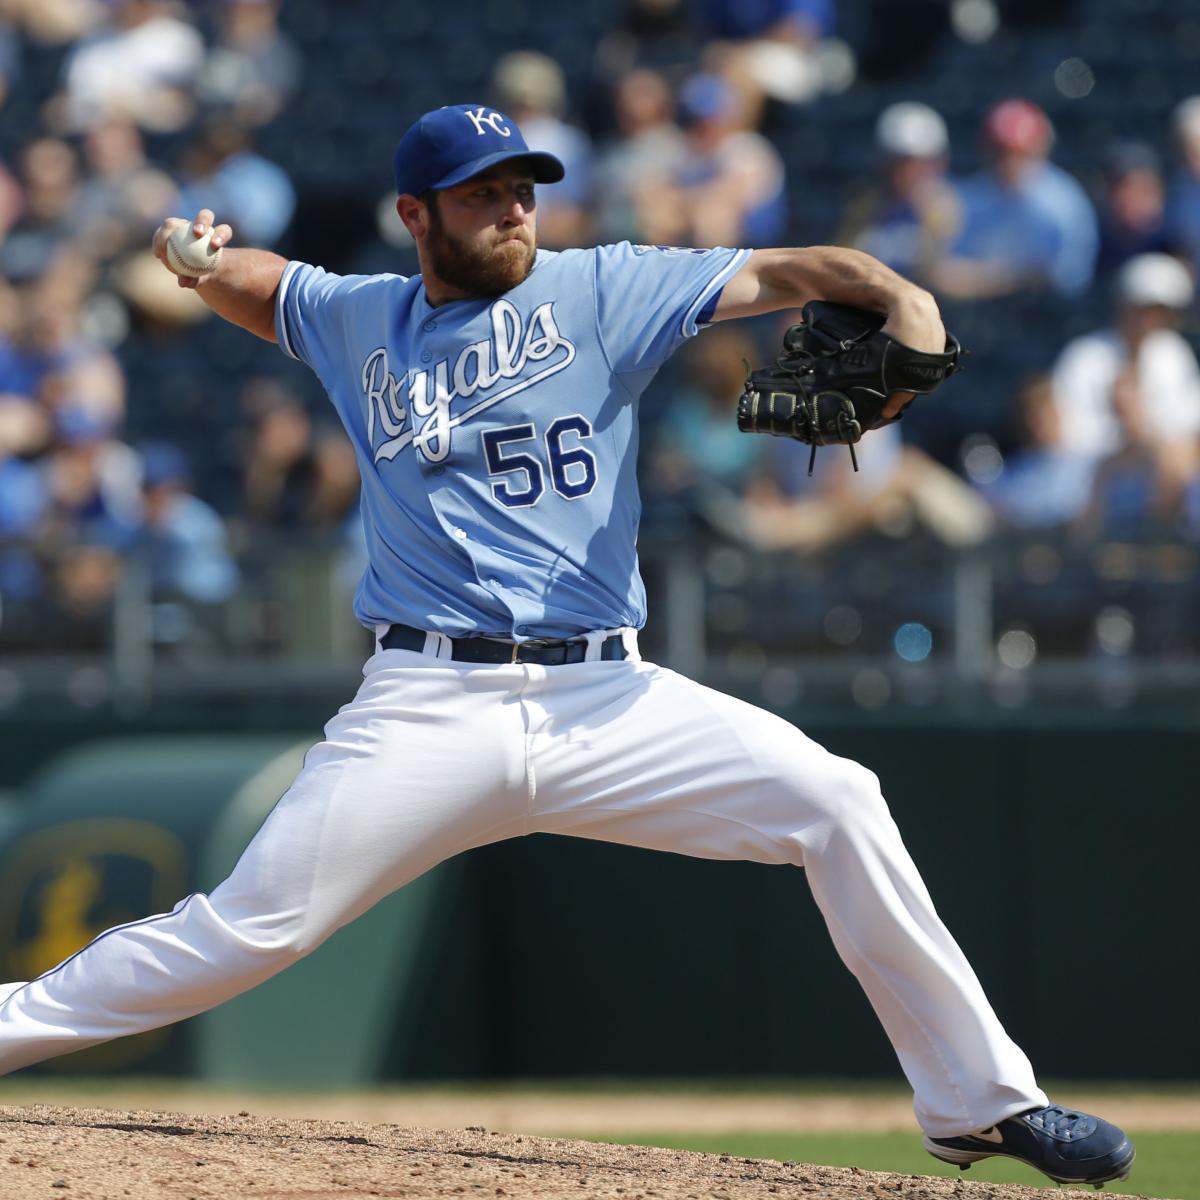 10 Kansas City Royals players are reportedly ineligible to play in